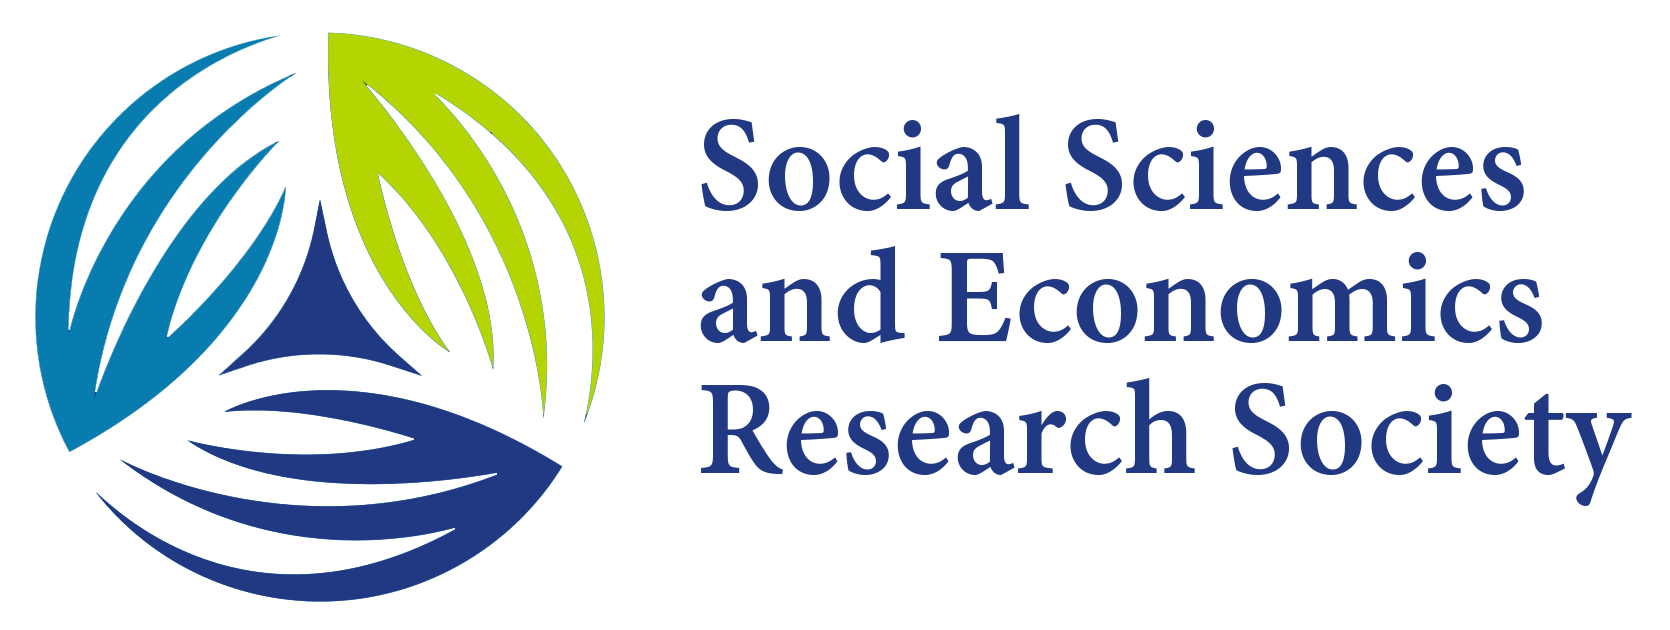 SSERS International Conference on  Social Sciences and Humanities, Business, Economics, Law & Regional Studies